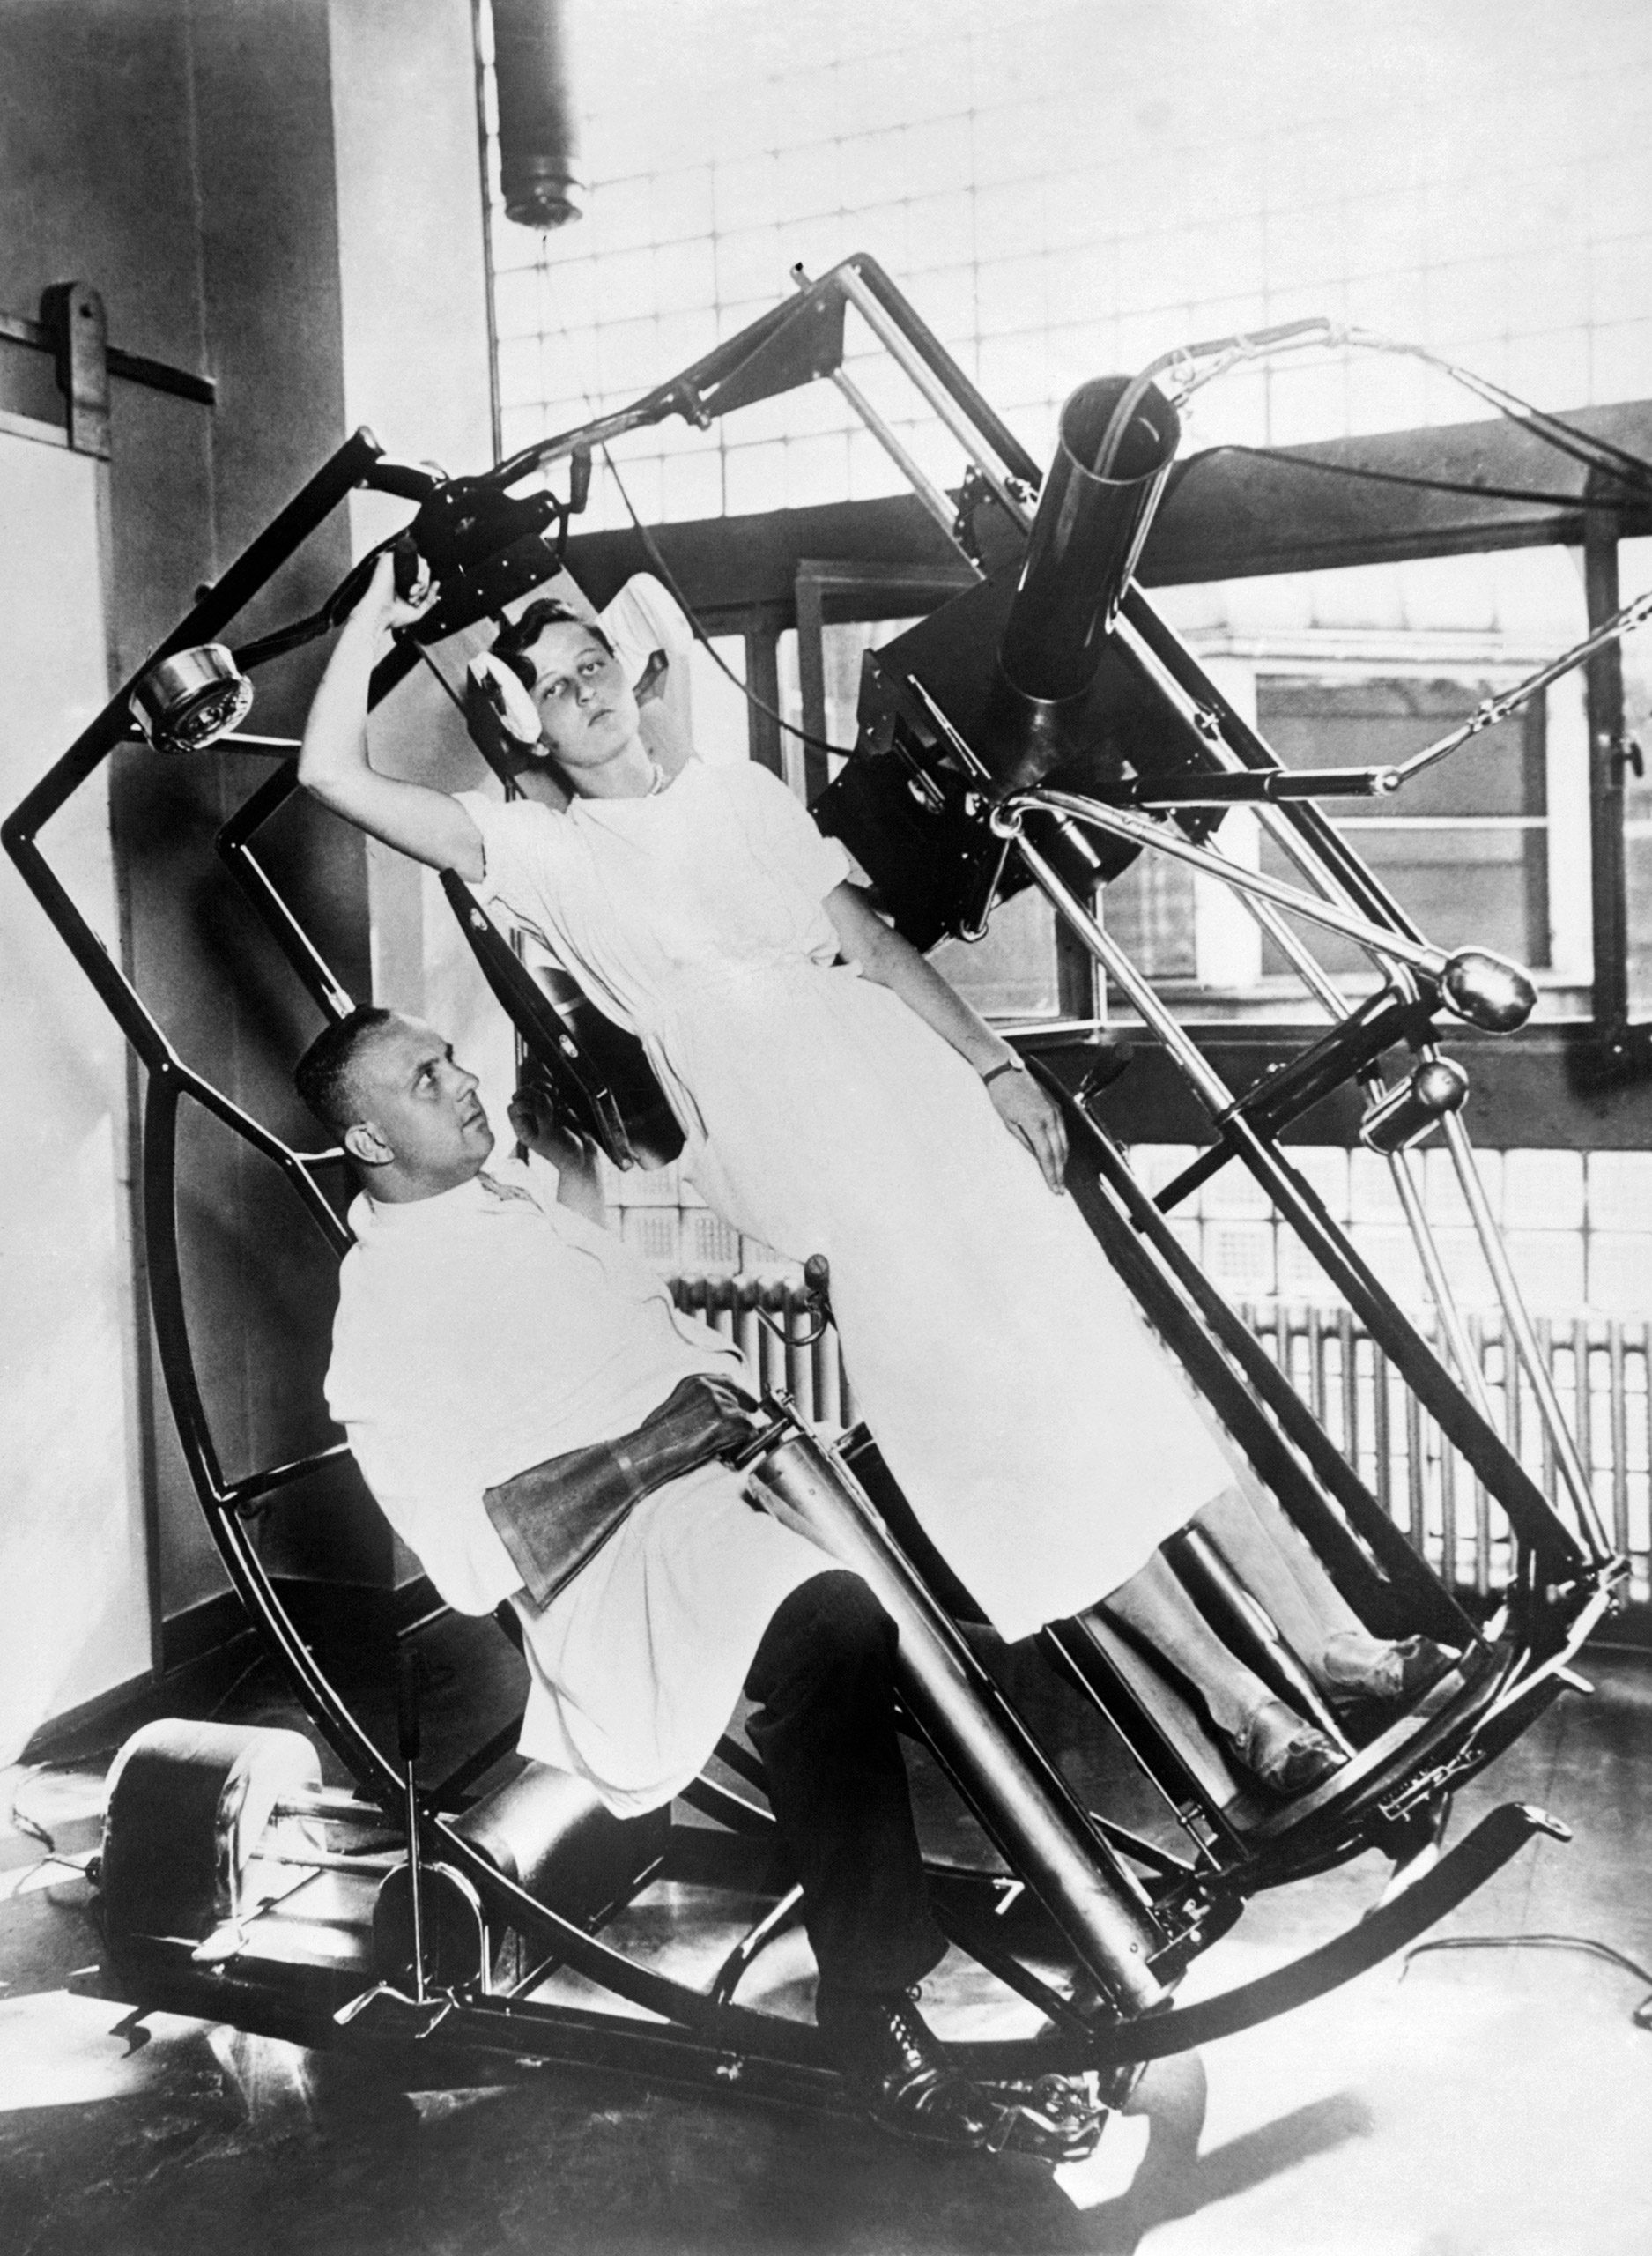 One of the advanced wonders at the Roentgen Institute, the modern Roentgen 'look through' machine, which prevents any injury to the treating physician, Frankfurt, Germany, circa 1929.